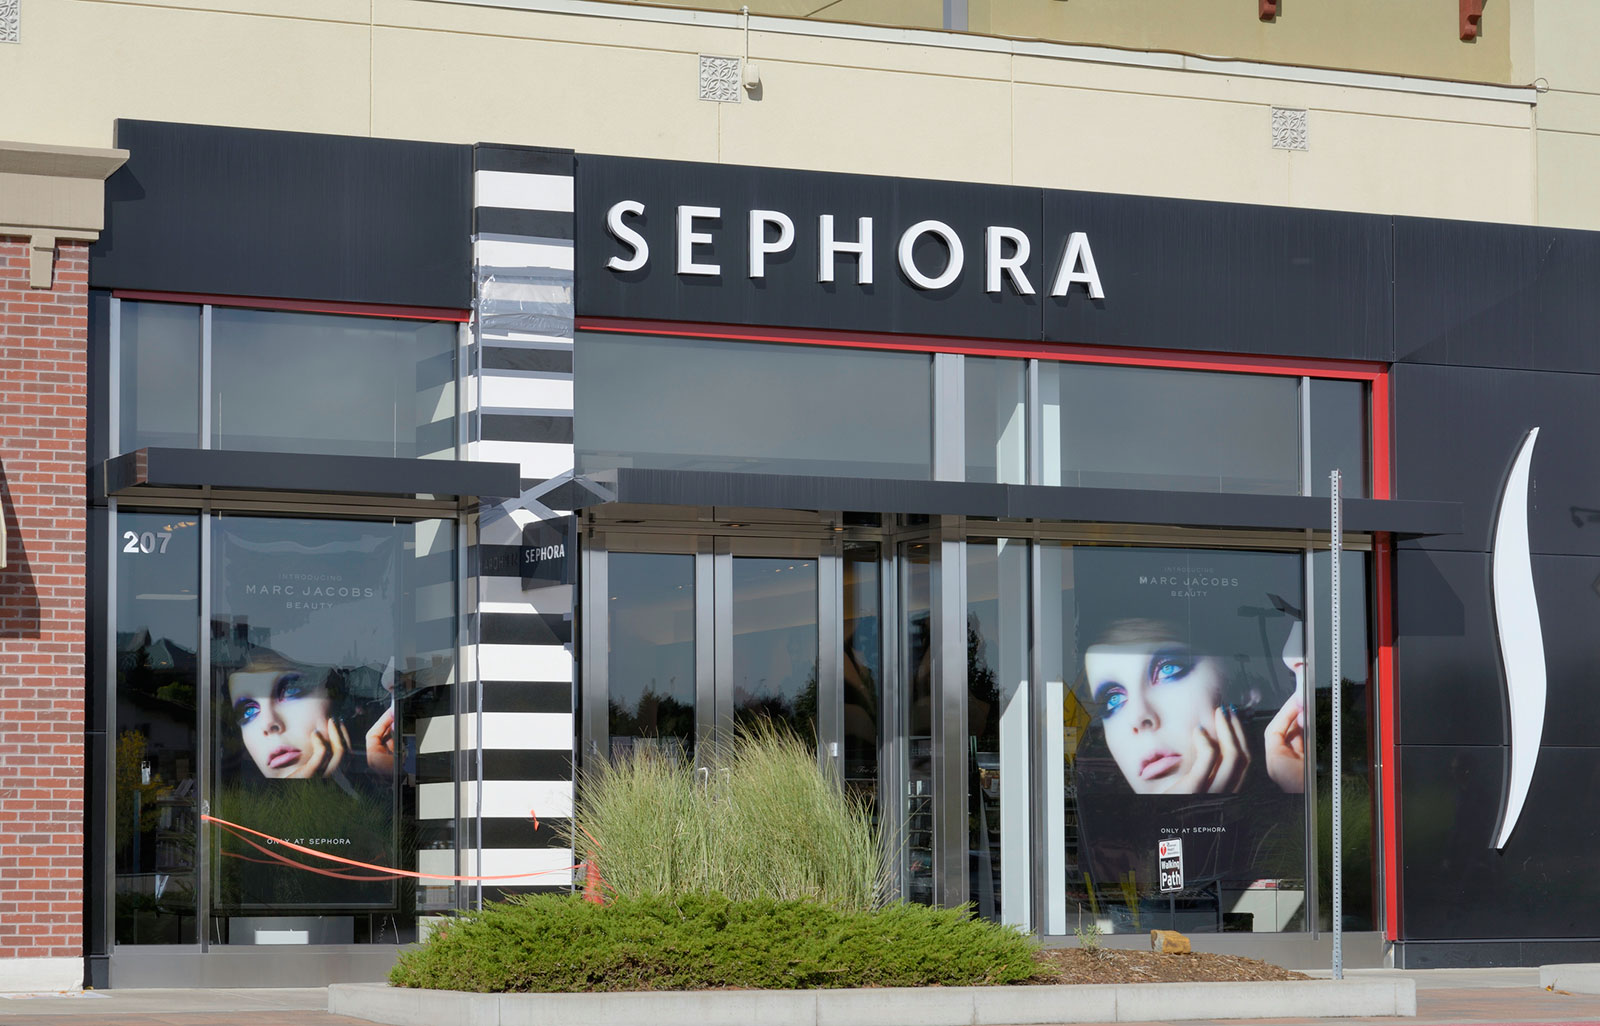 Sephora: The Omnichannel Strategy Which Redefined CX in Cosmetics